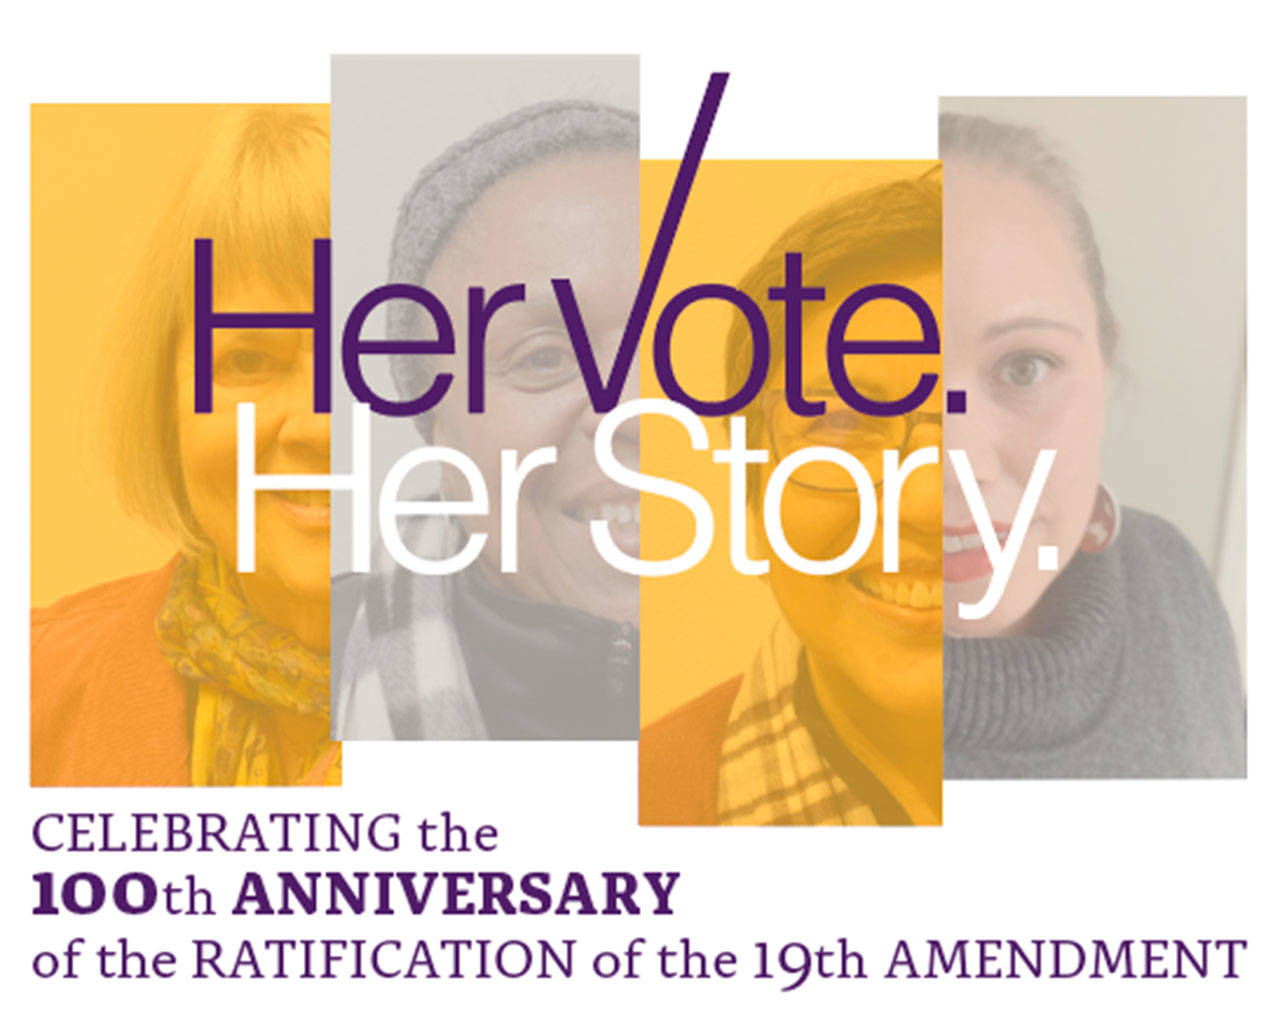 Image courtesy of the Bainbridge Island Historical Museum | In honor of the 100th anniversary of the ratification of the 19th amendment, the Bainbridge Island Historical Museum will mount “Her Vote. Her Story.,” which celebrates the significant milestone from a decidedly local vantage point.